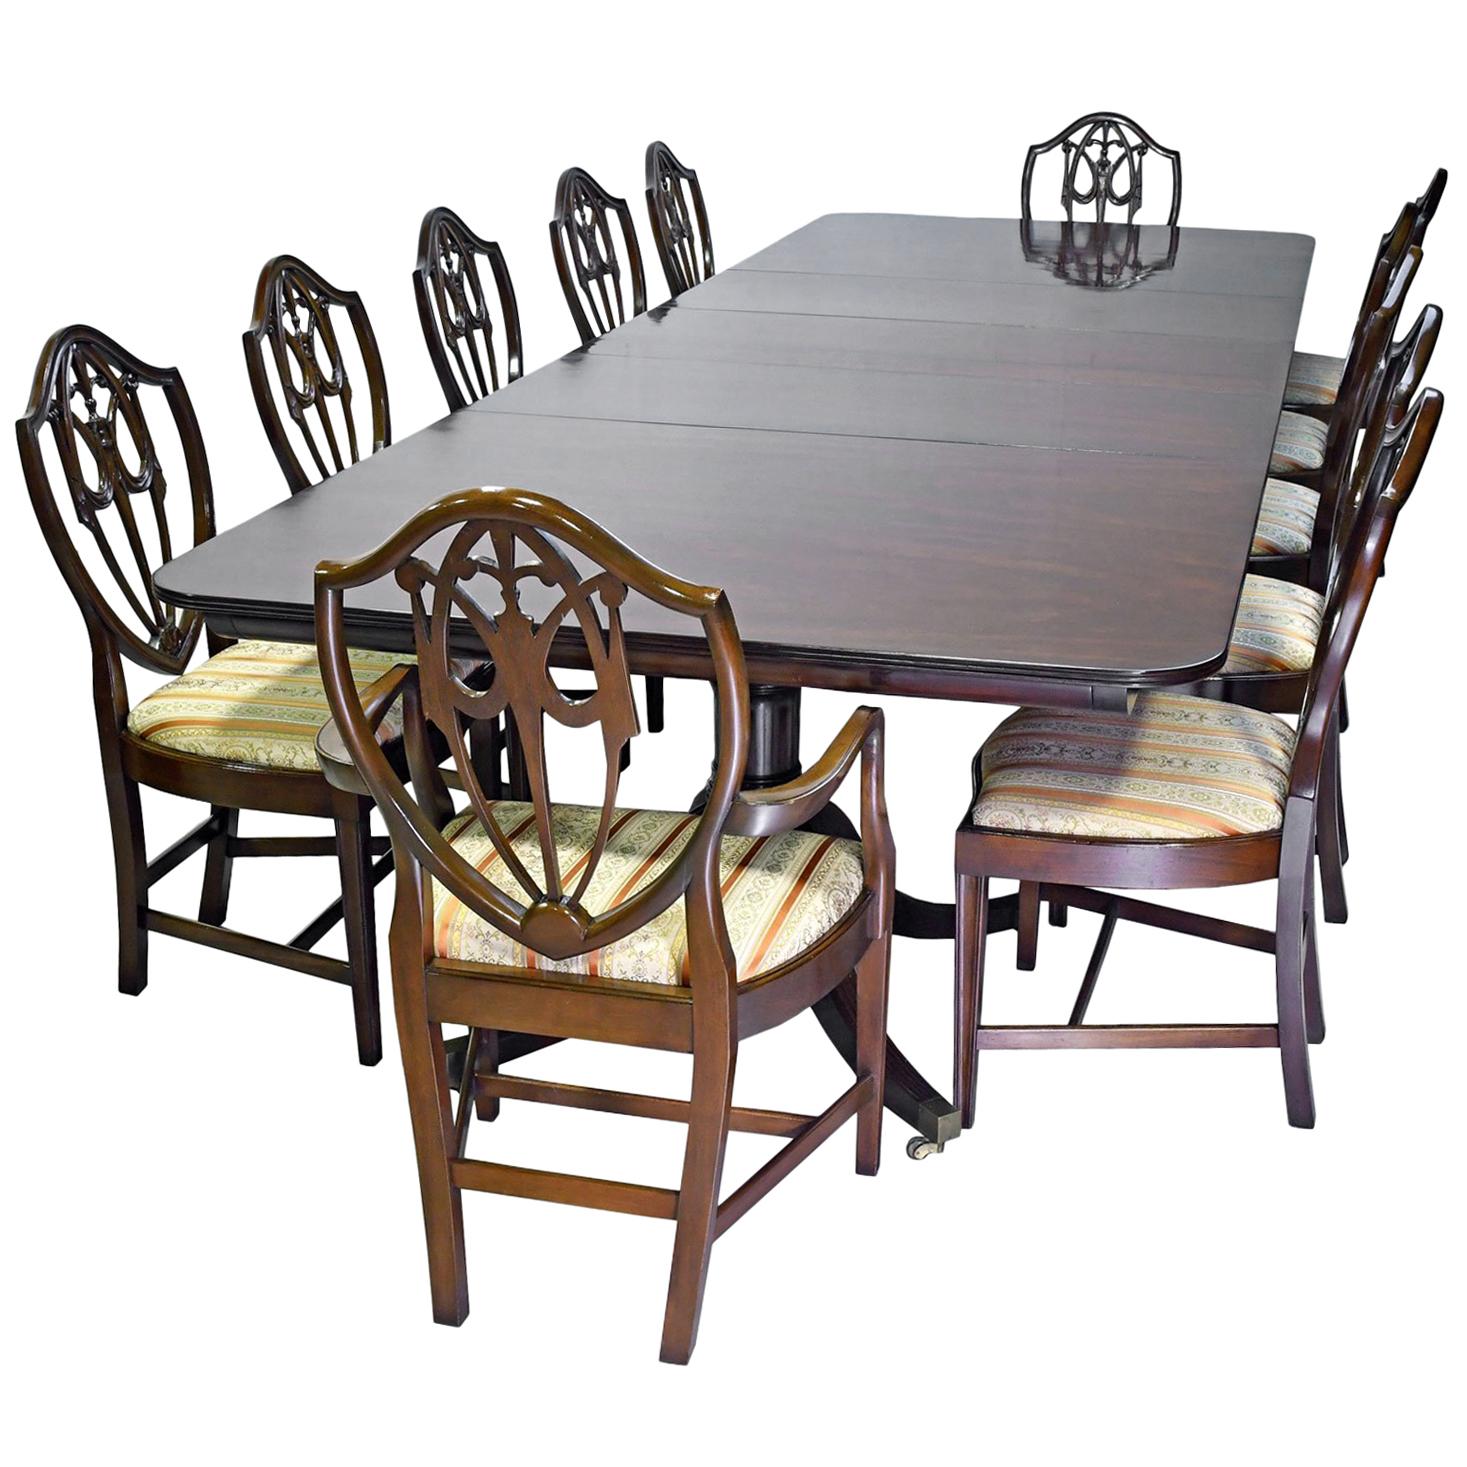  Hepplewhite-Style Dining Set in Mahogany, 12' Long Table and Set of 12 Chairs